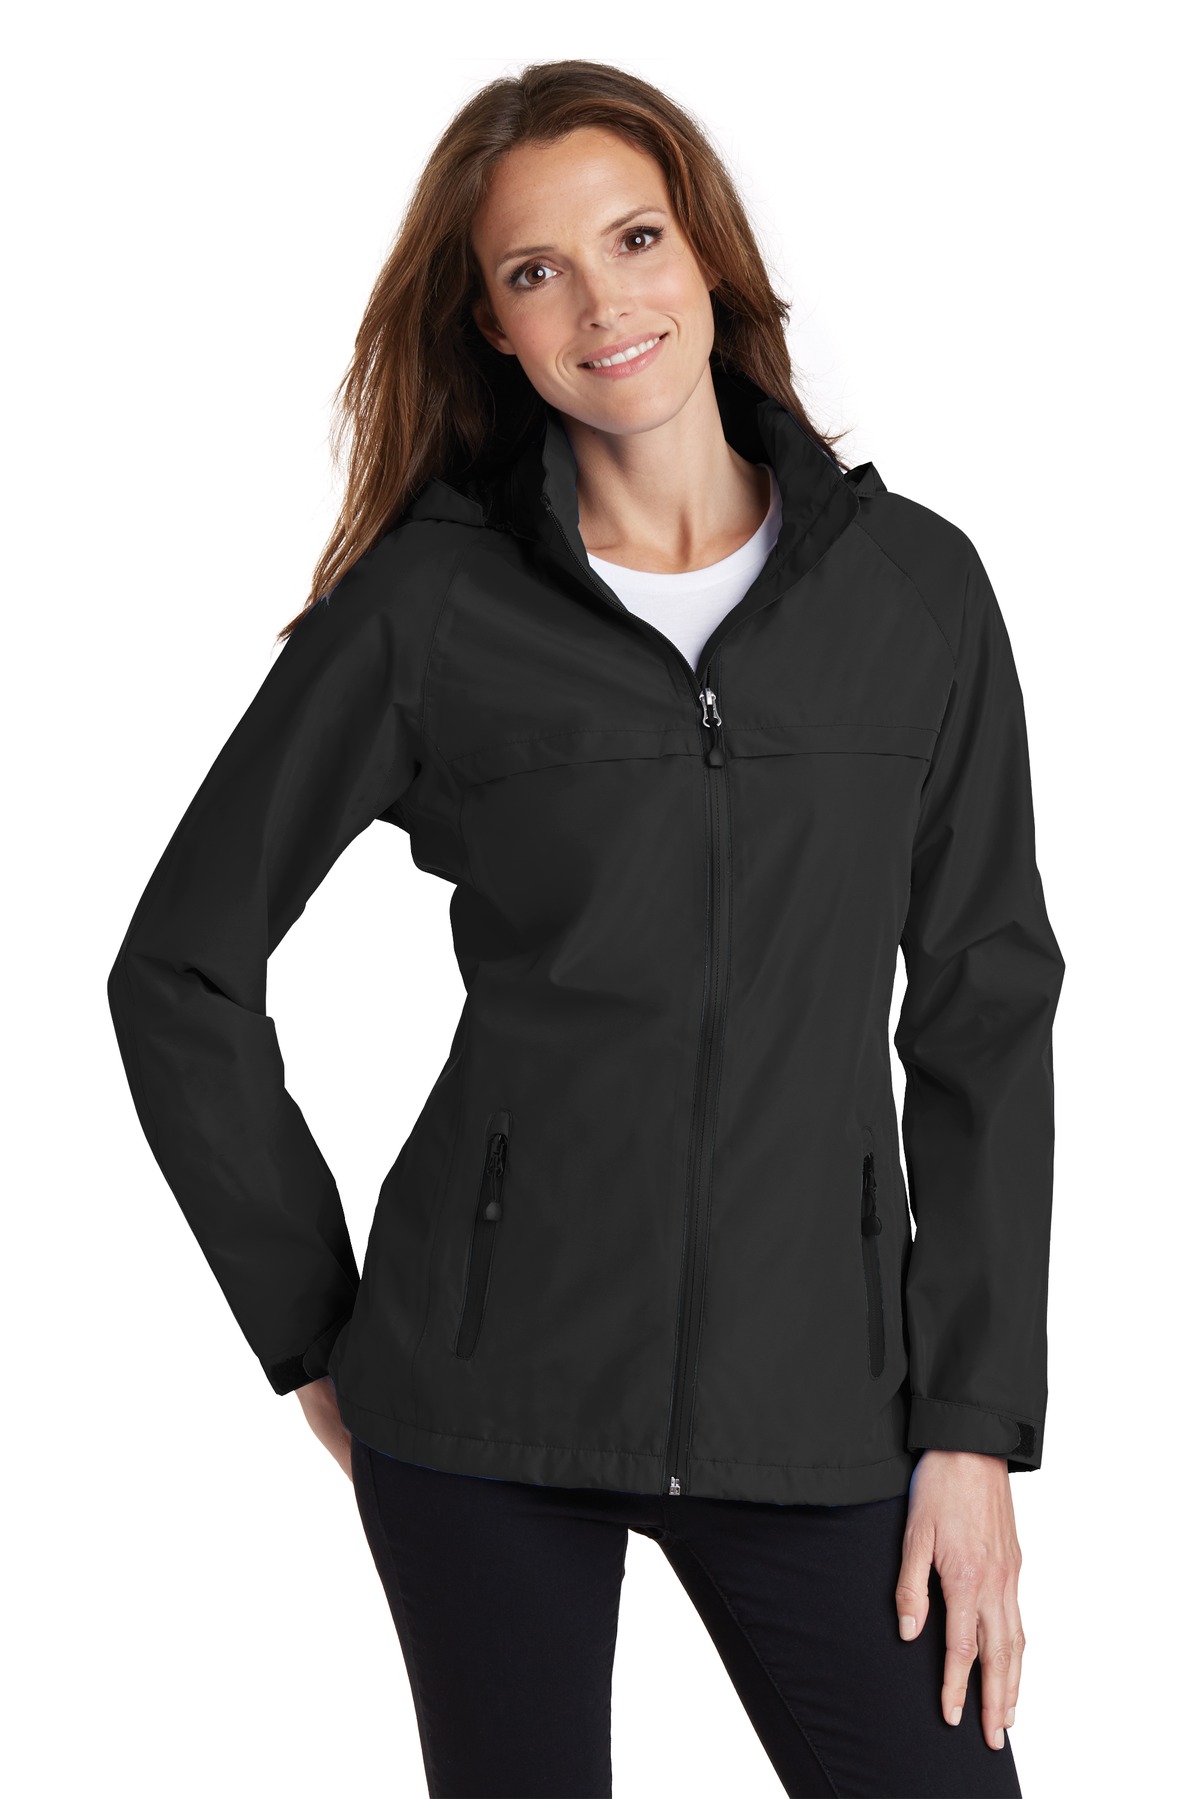 Port Authority Ladies Outerwear for Hospitality ® Ladies Torrent Waterproof Jacket.-Port Authority